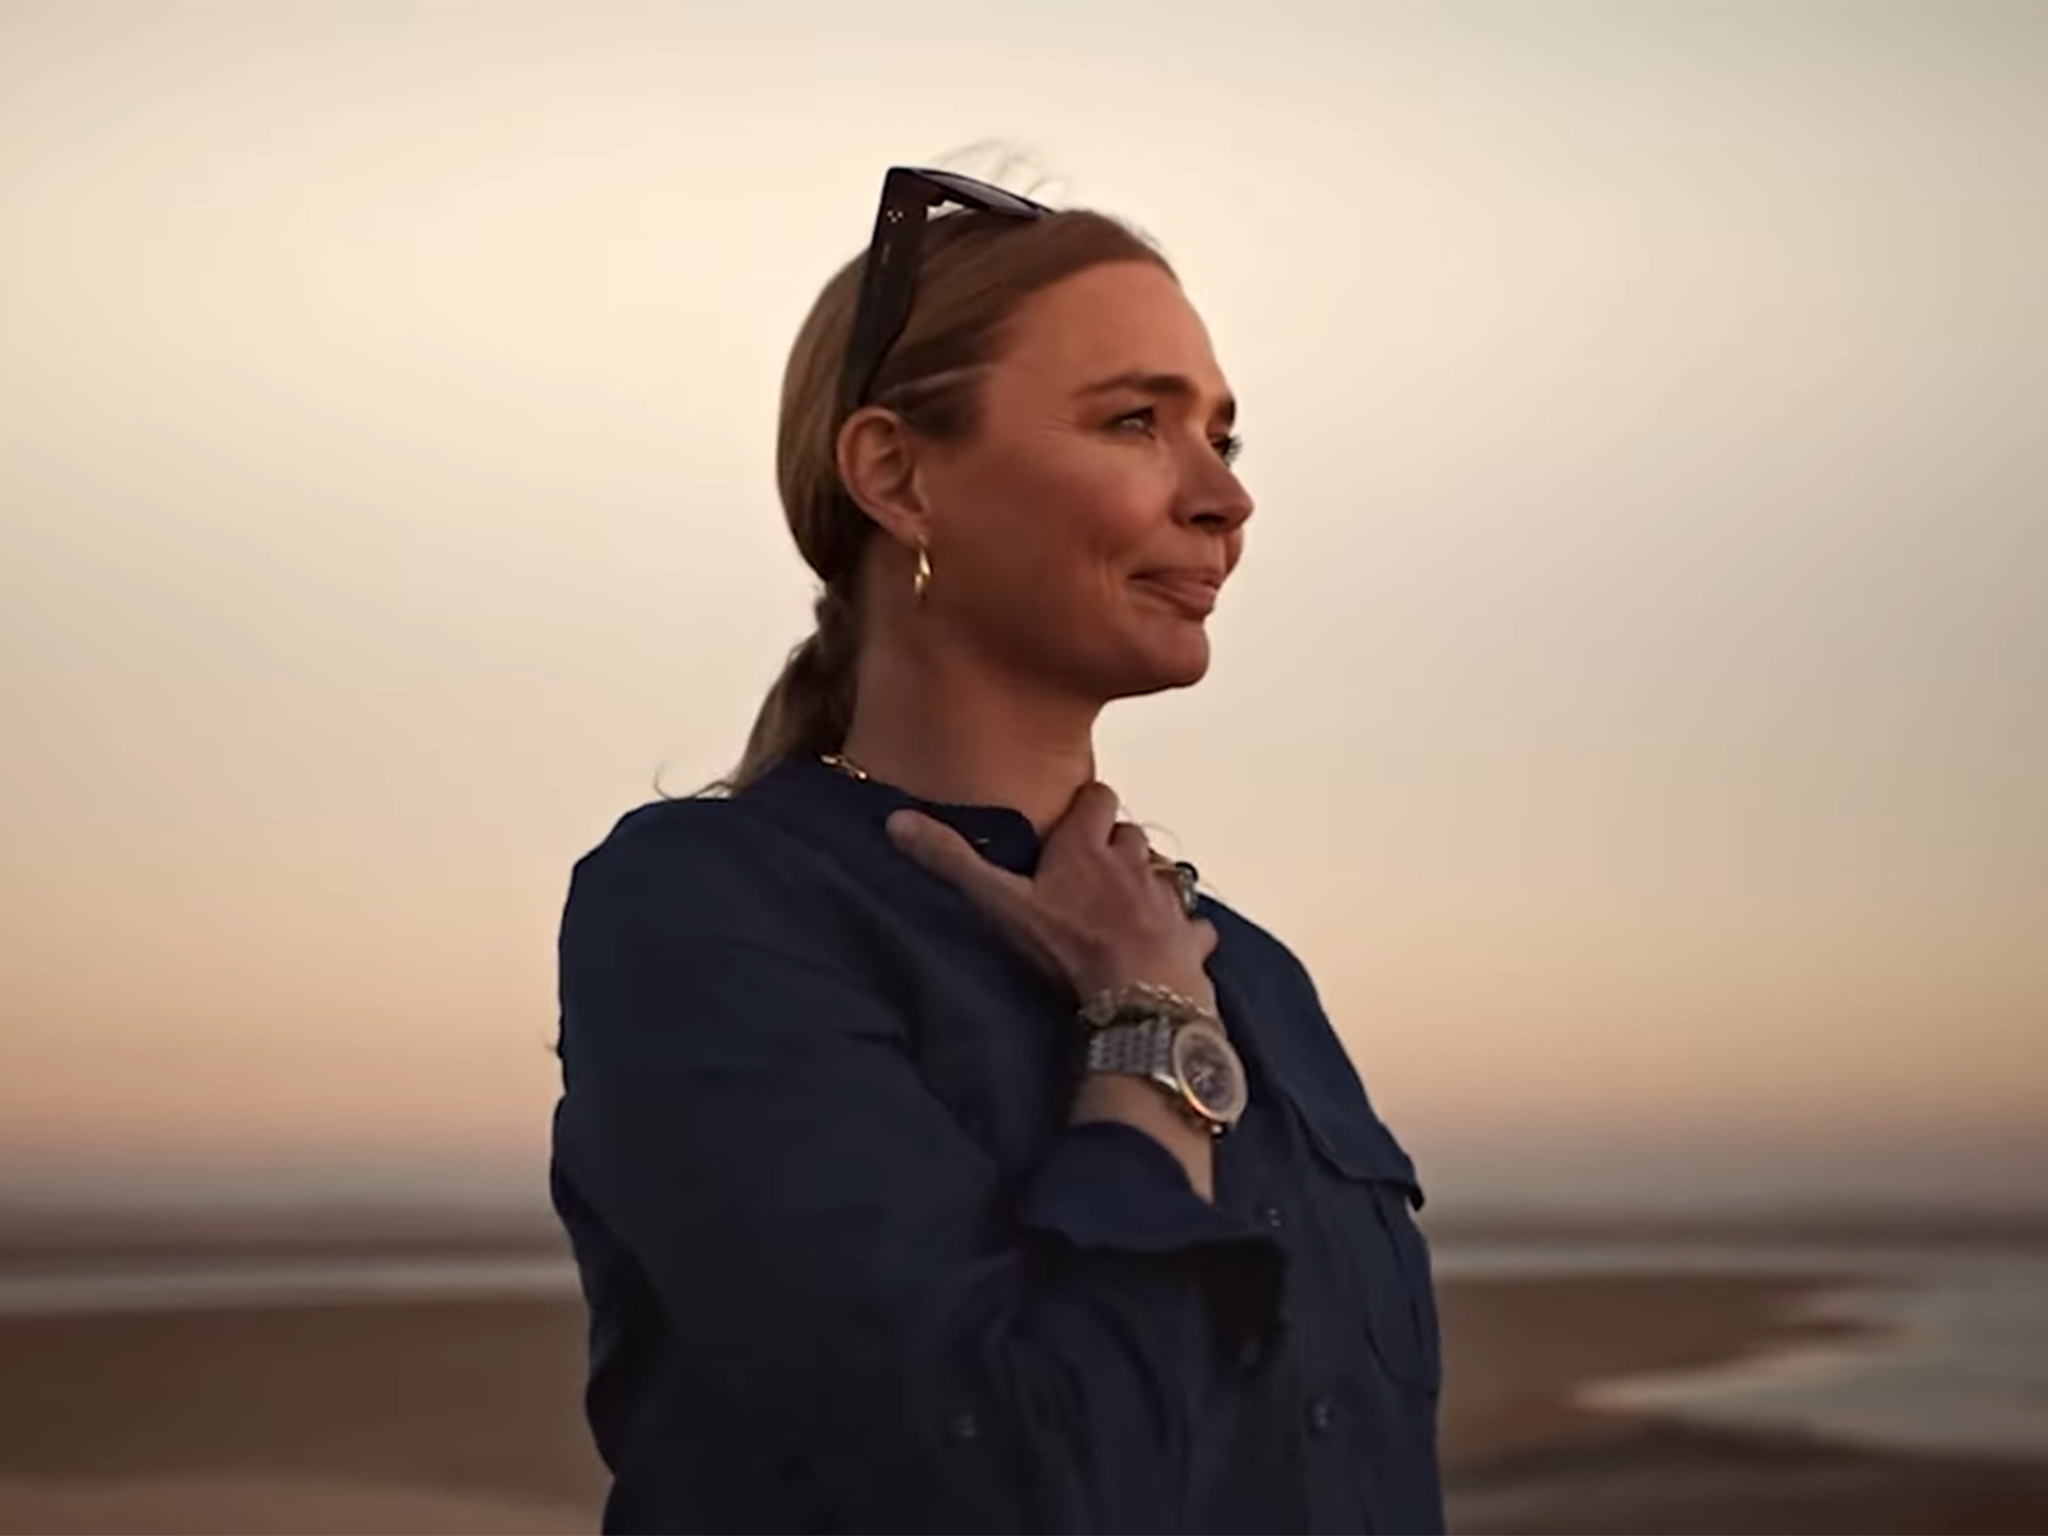 BBC StoryWorks has produced three ‘blandly uncritical’ videos for Qatar Tourism fronted by Jodie Kidd